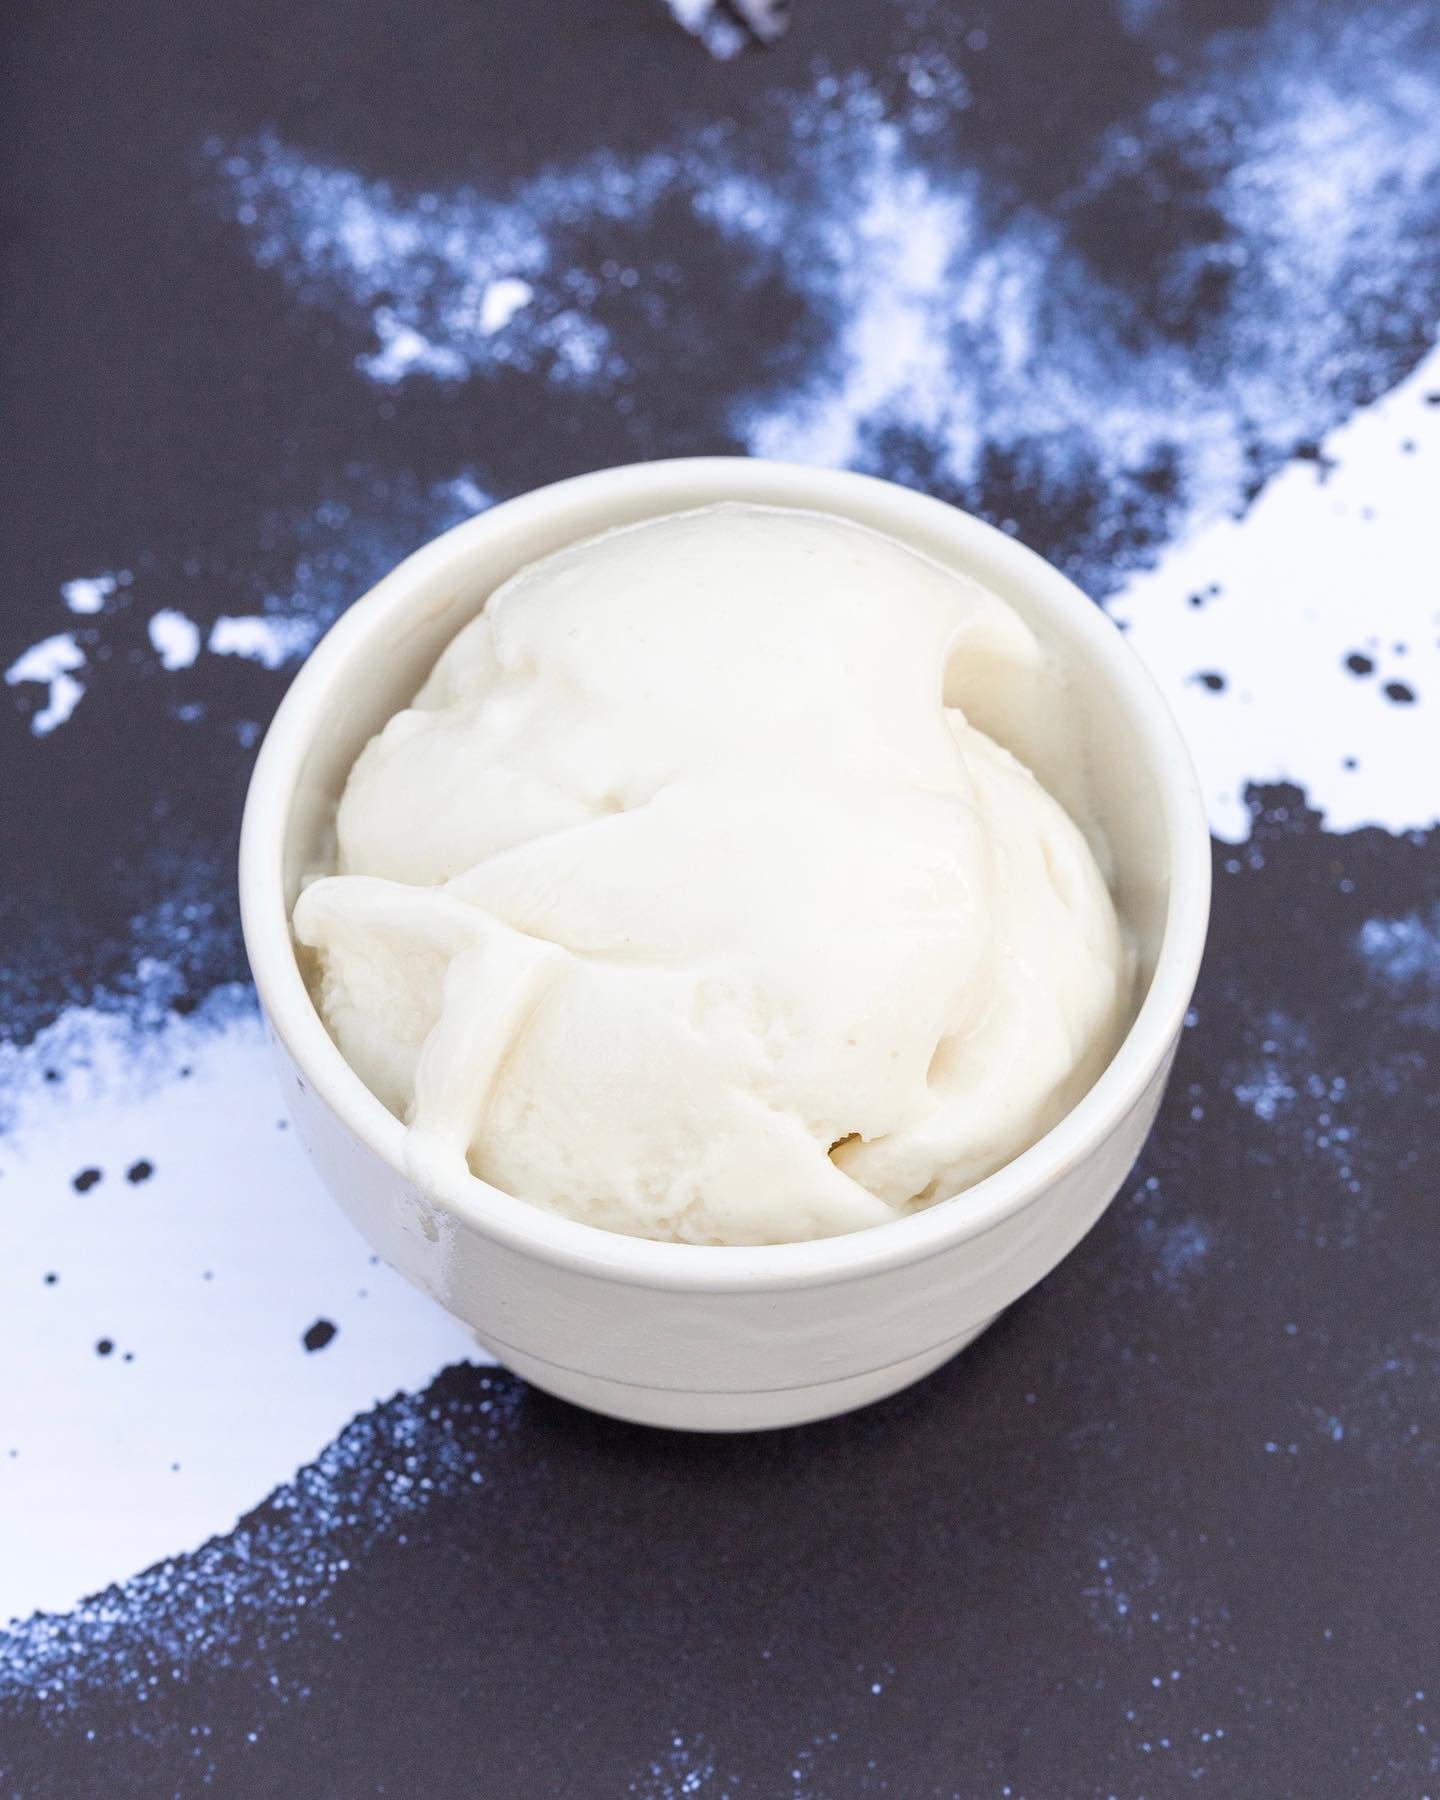 Lemongrass Sorbet! Made of lemongrass, lime, and coconut ginger. Light, refreshing, and the perfect remedy to the AZ heat!